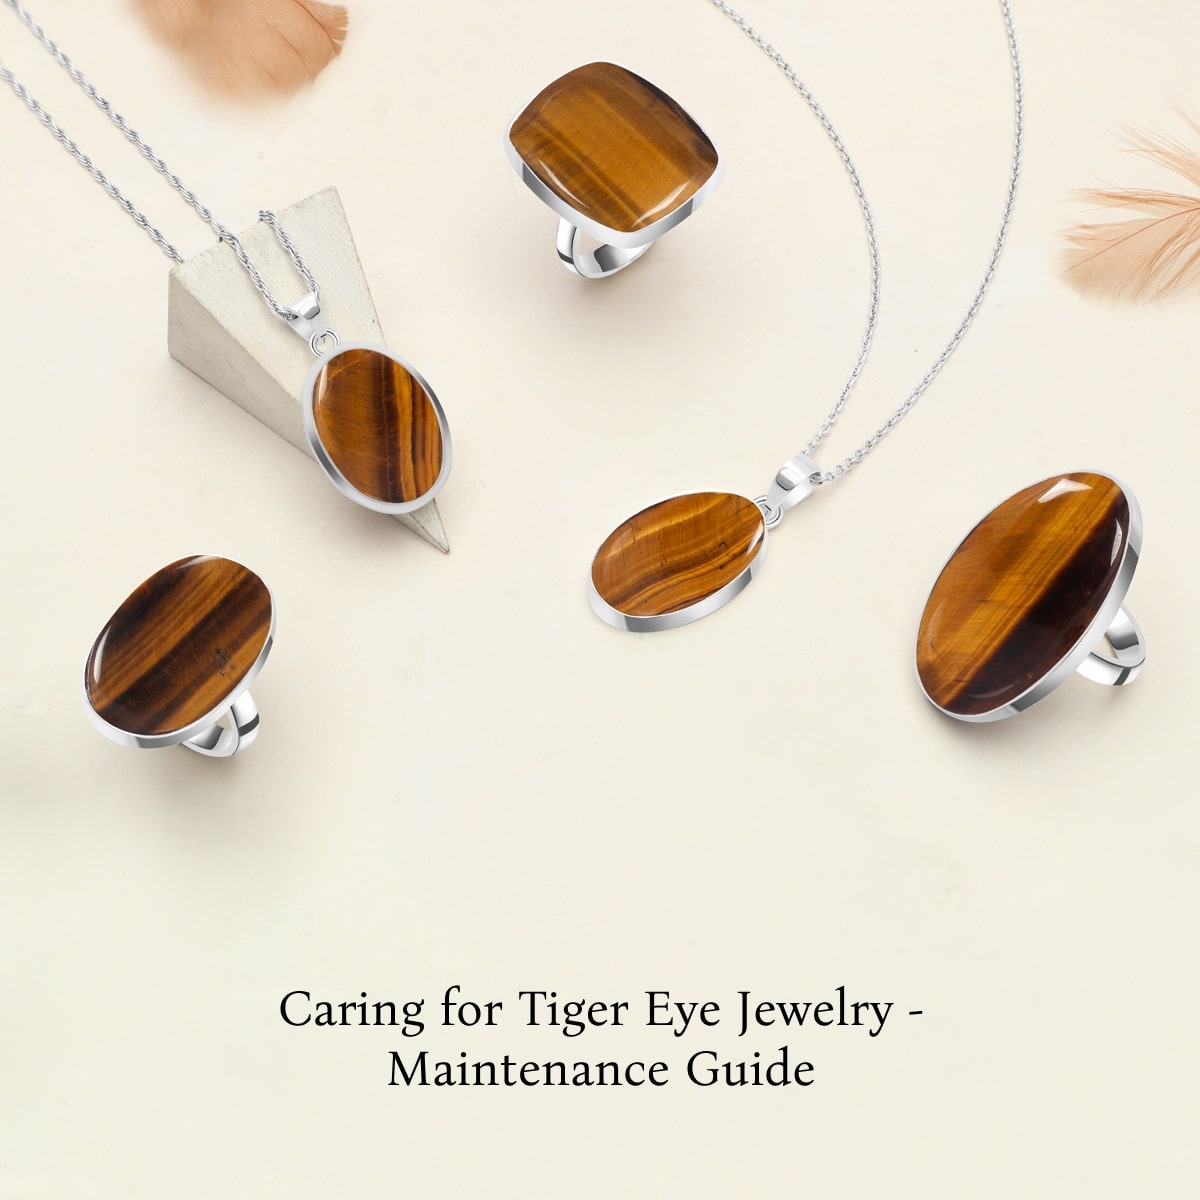 How to Care & Maintain Your Tiger Eye Jewelry?